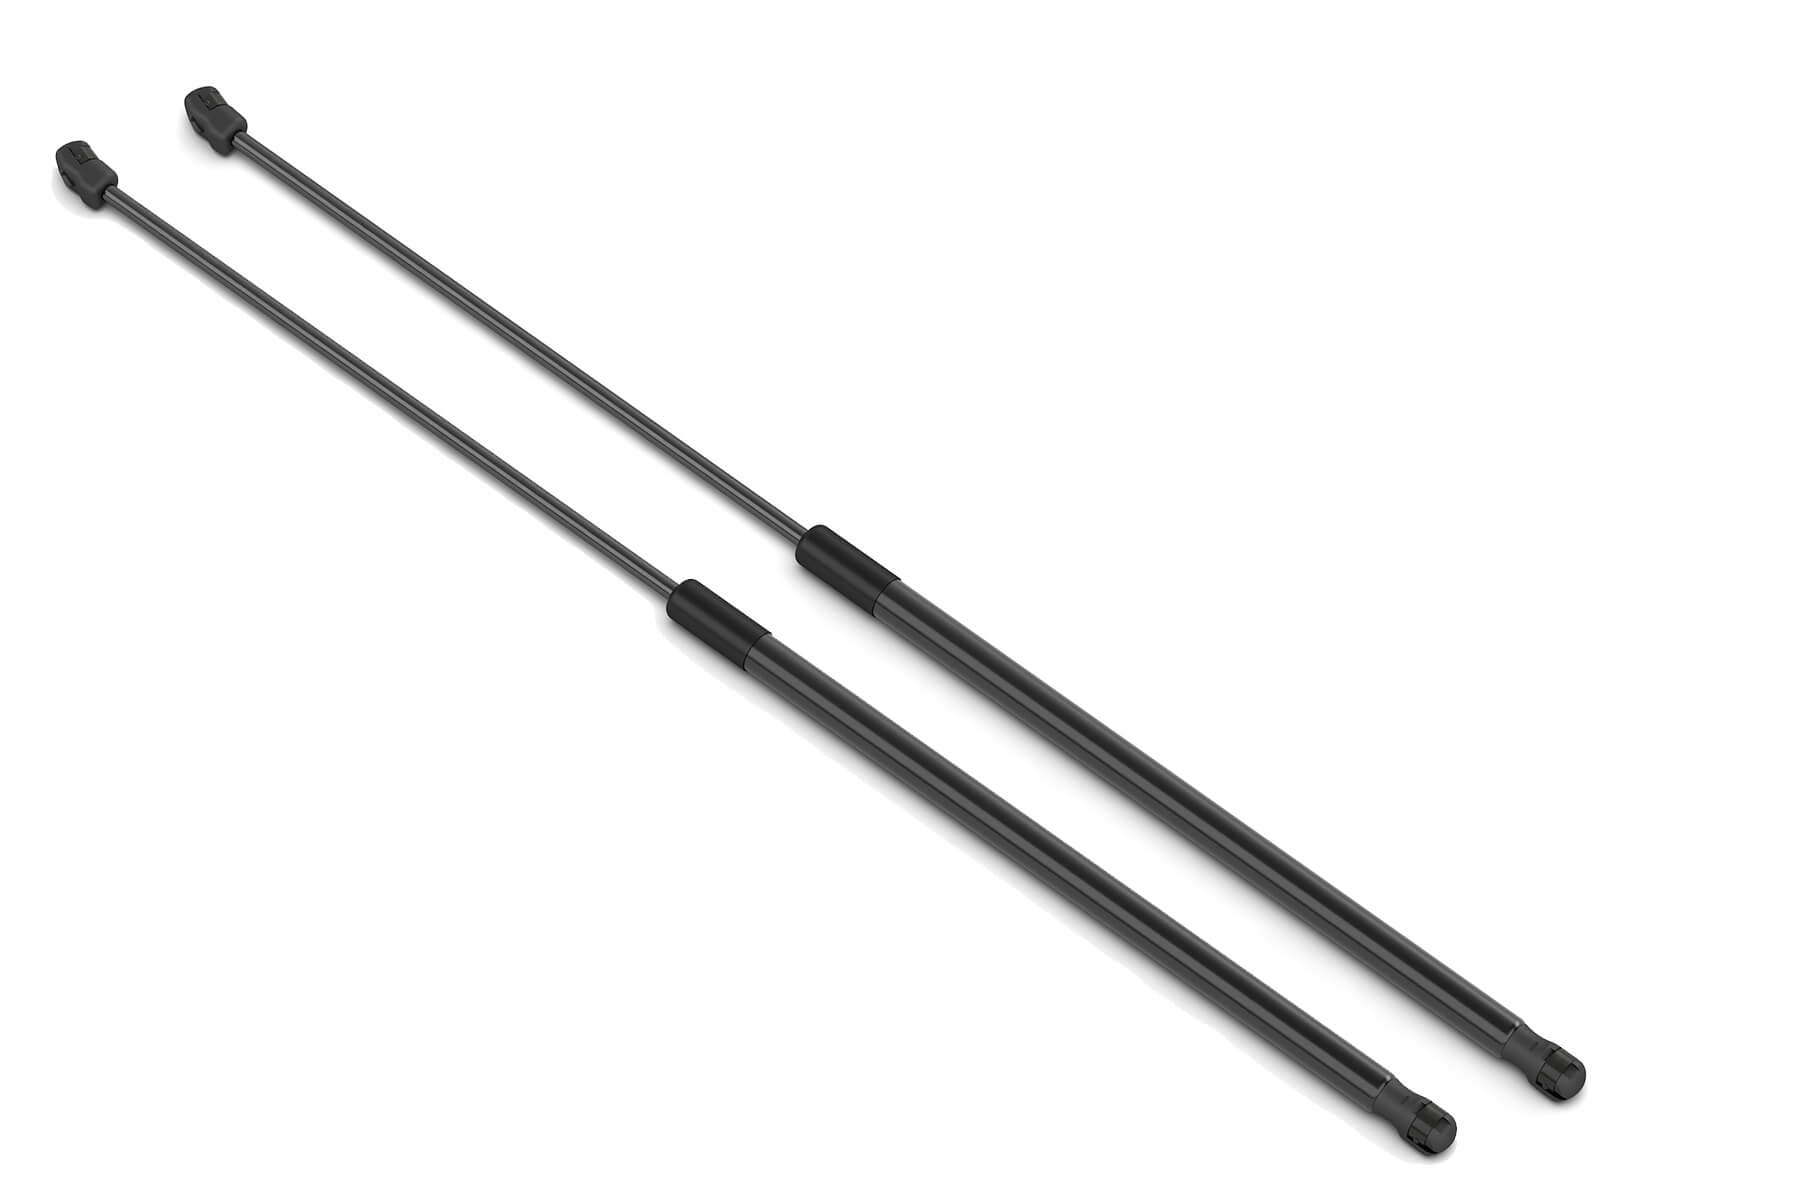 Tonneau Cover Lift Supports Replaces # 713119 2 Qty 